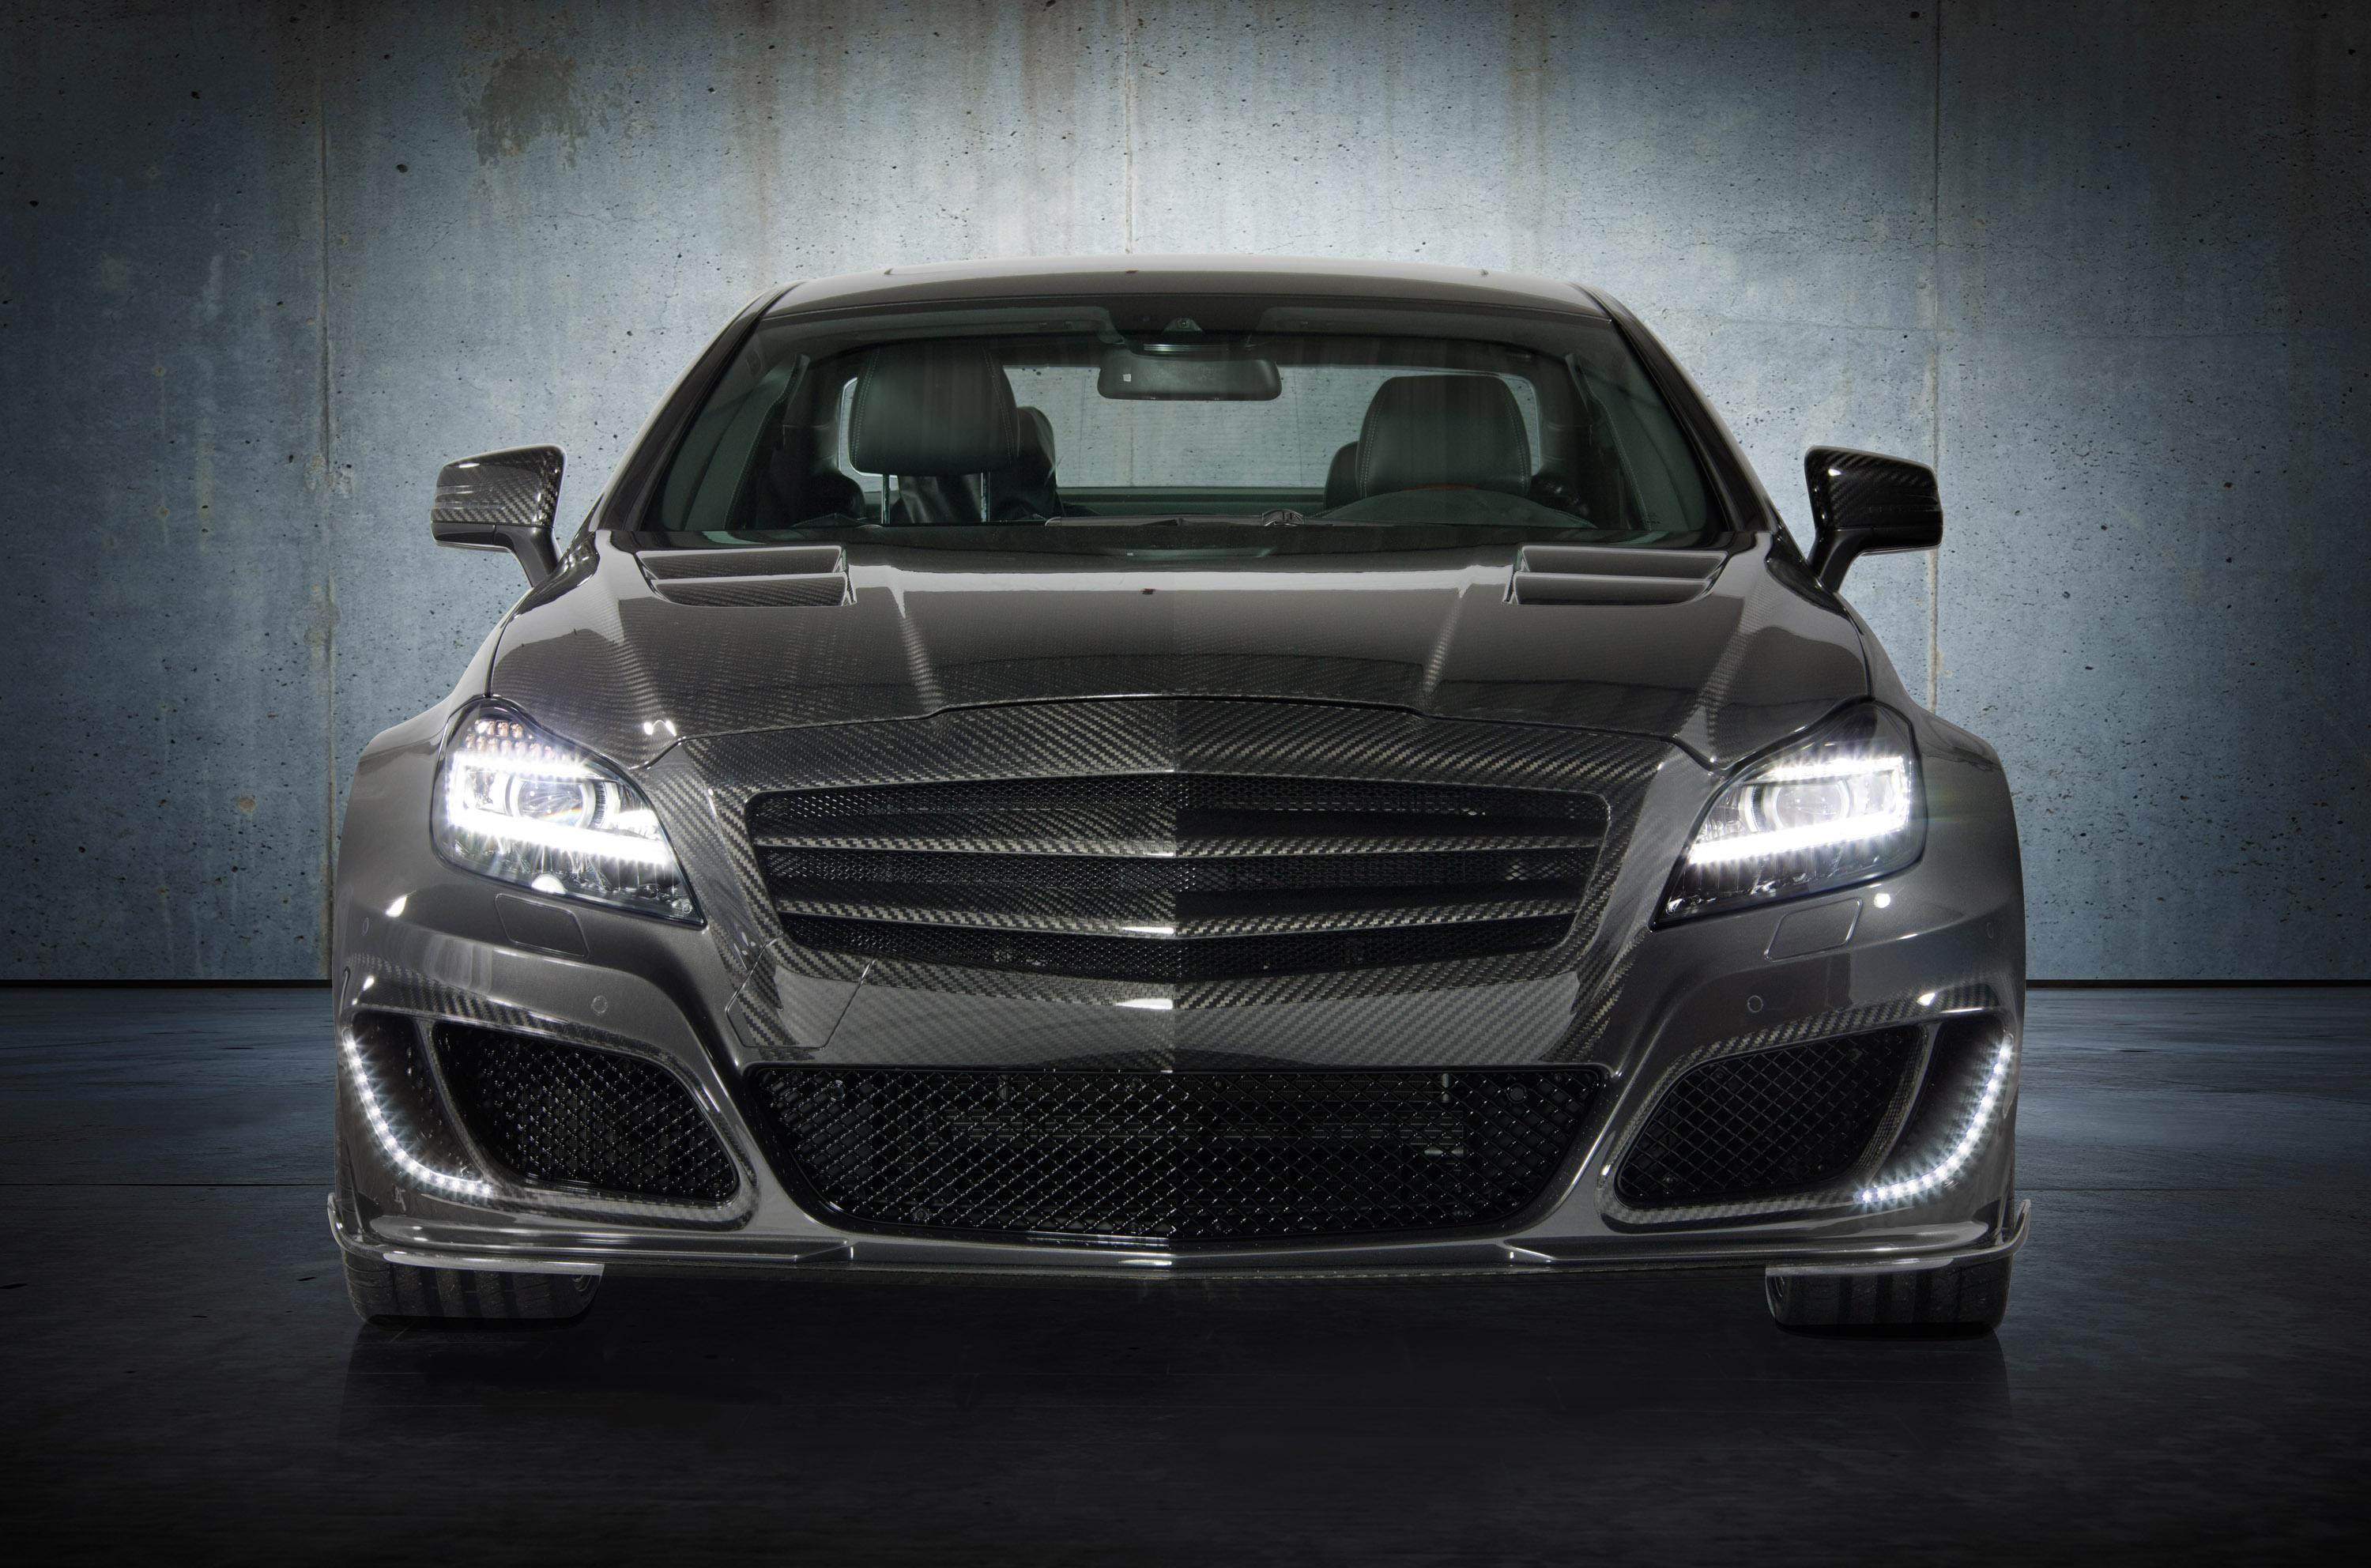 MANSORY Mercedes-Benz CLS 63 AMG photo #1